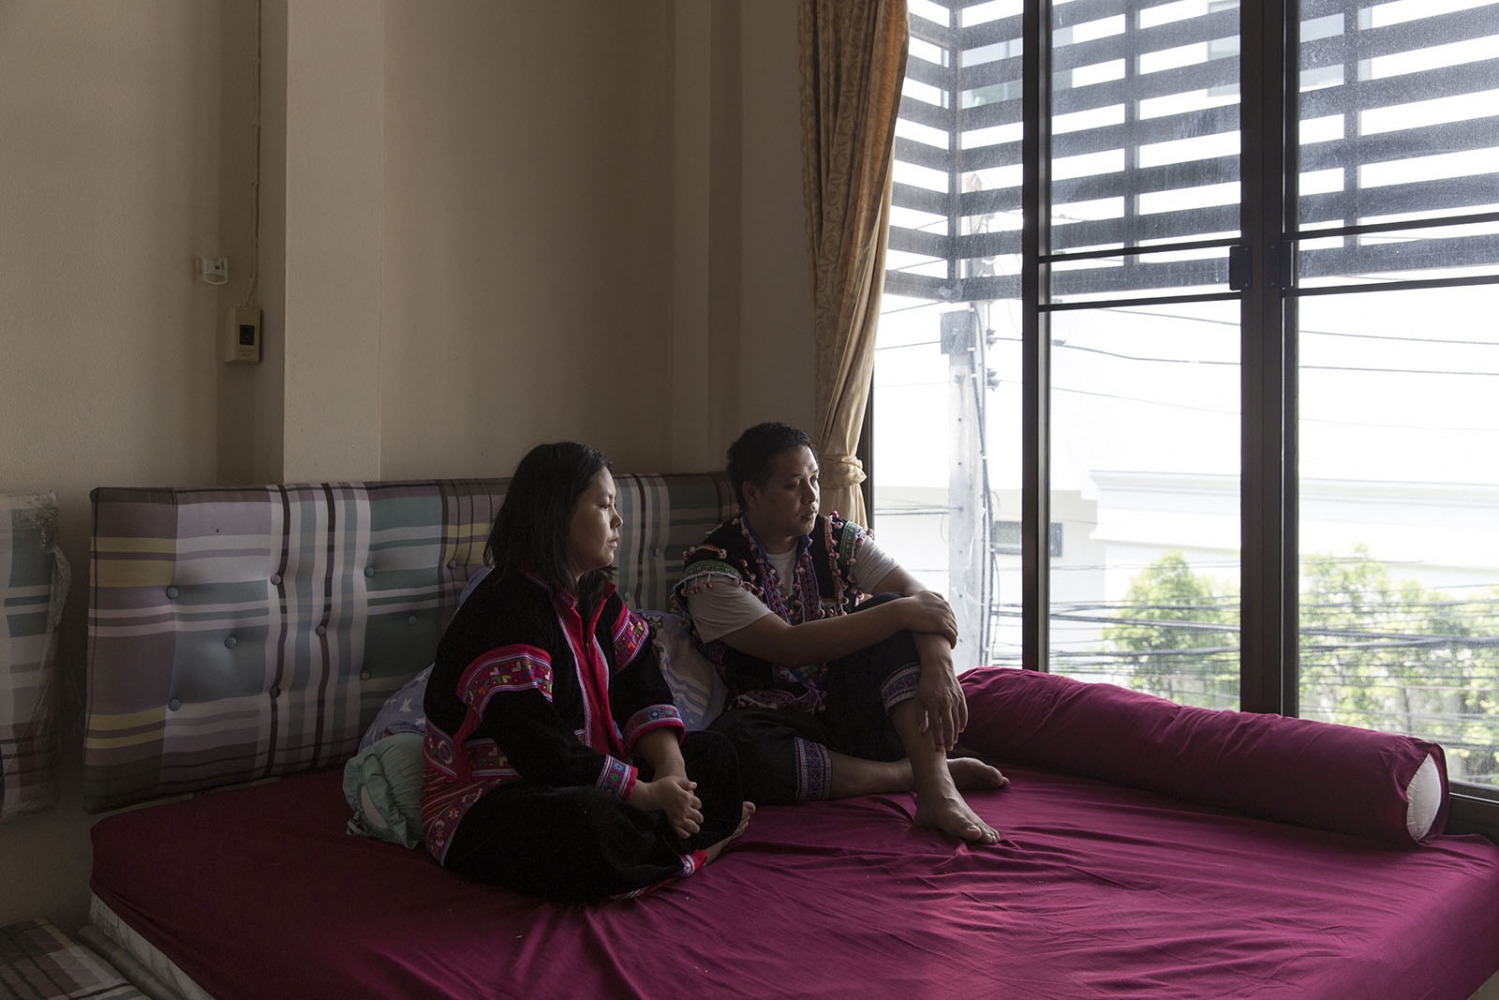 Maitree Chamroensuksakul (right) and Yuphin Saja (left) sit in a safe-house in northern Thailand. Maitre and his wife, including 2 small children have been living in 3 different safe houses since 2017 after the death of Chaiyaphum Pasae, their adopted son, for fears of reprisals during their fight for justice. Northern Thailand